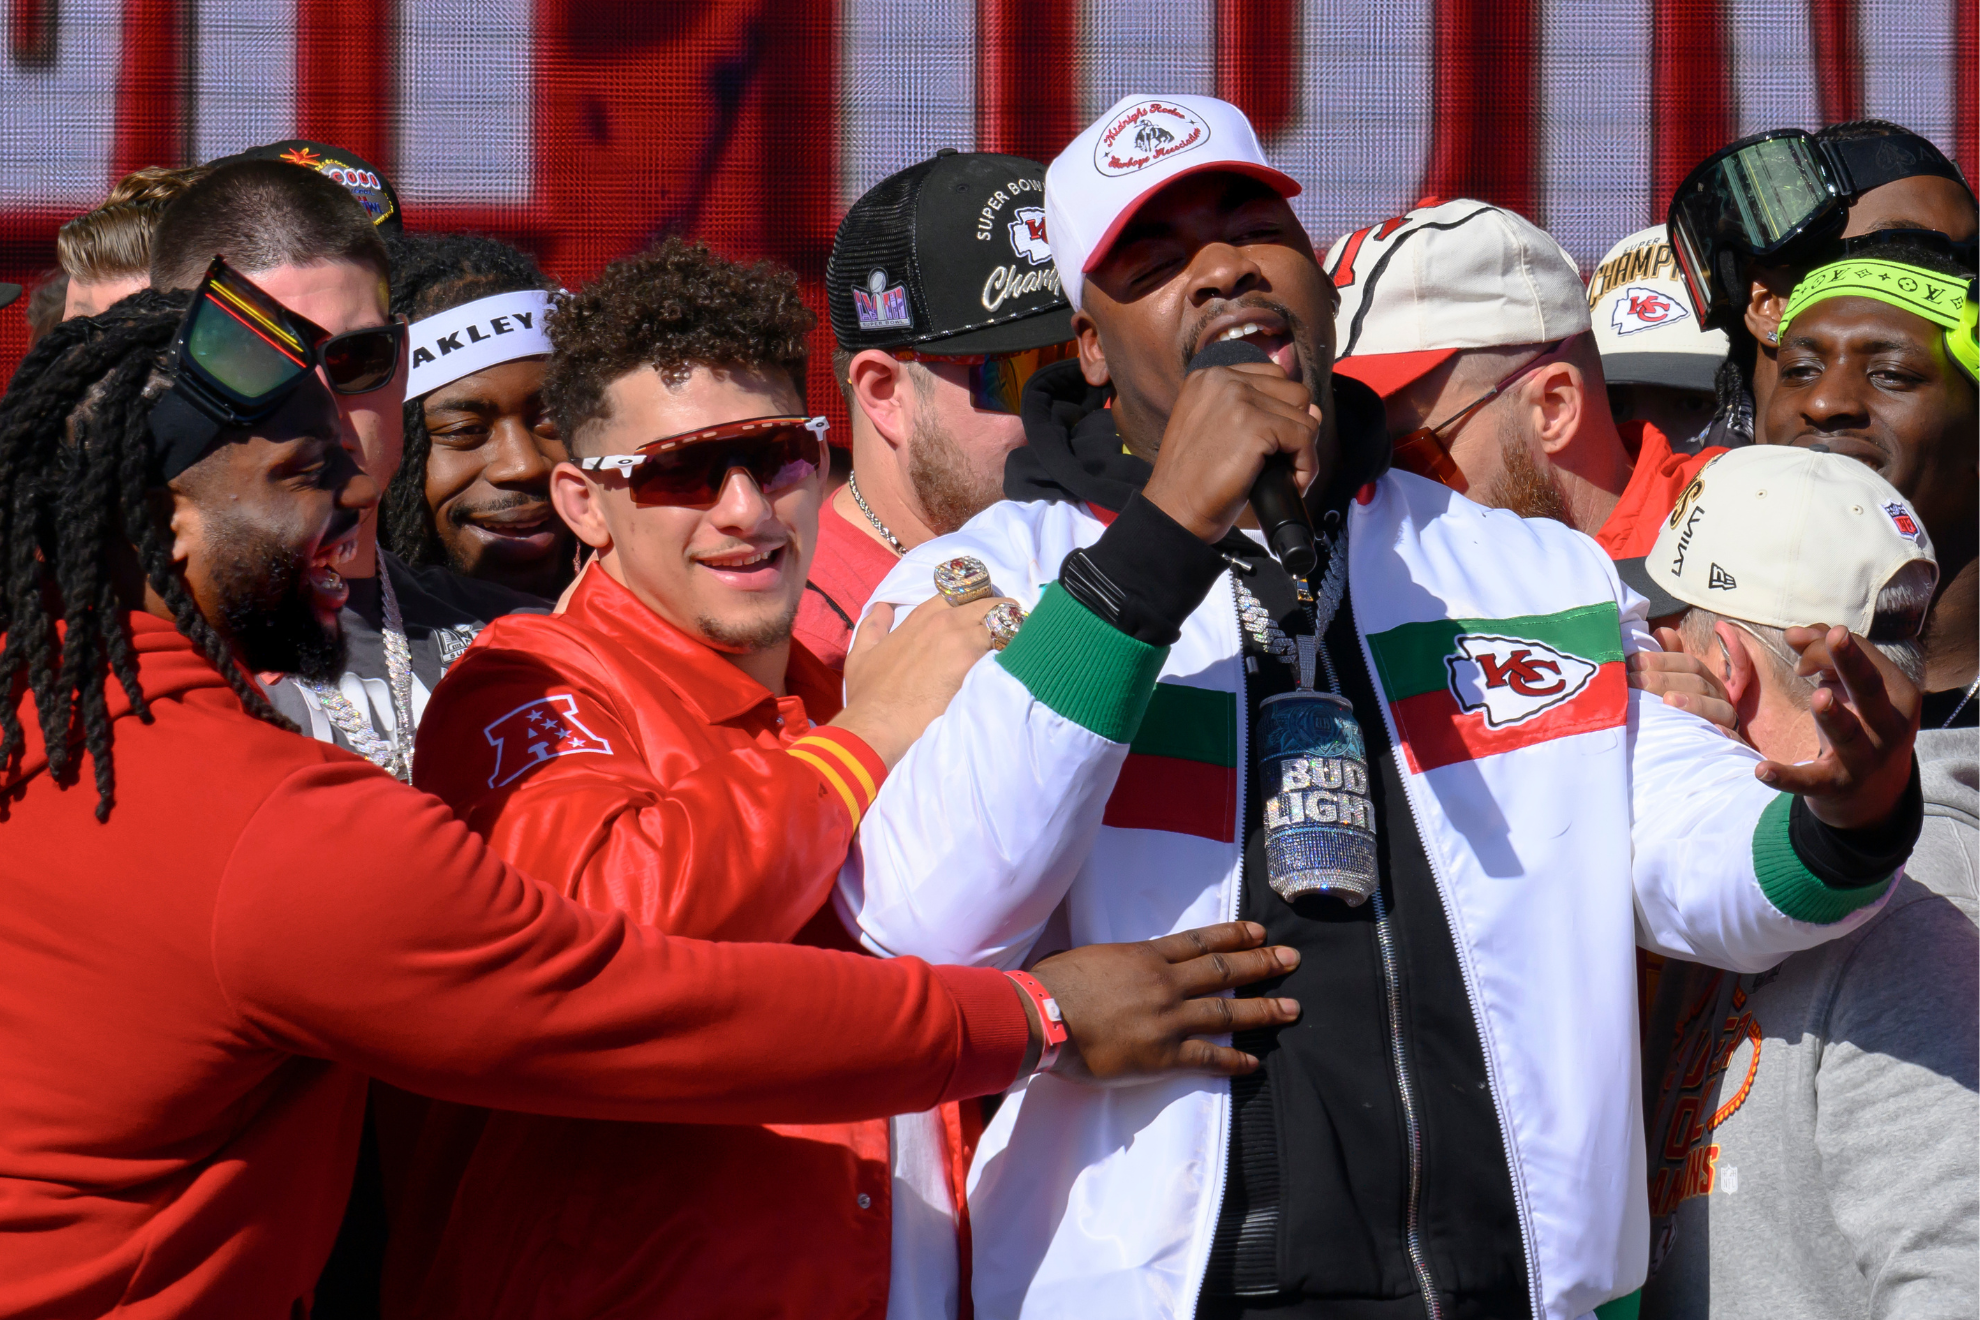 Jones (right, in white jacket) at the Chiefs parade on Wednesday.